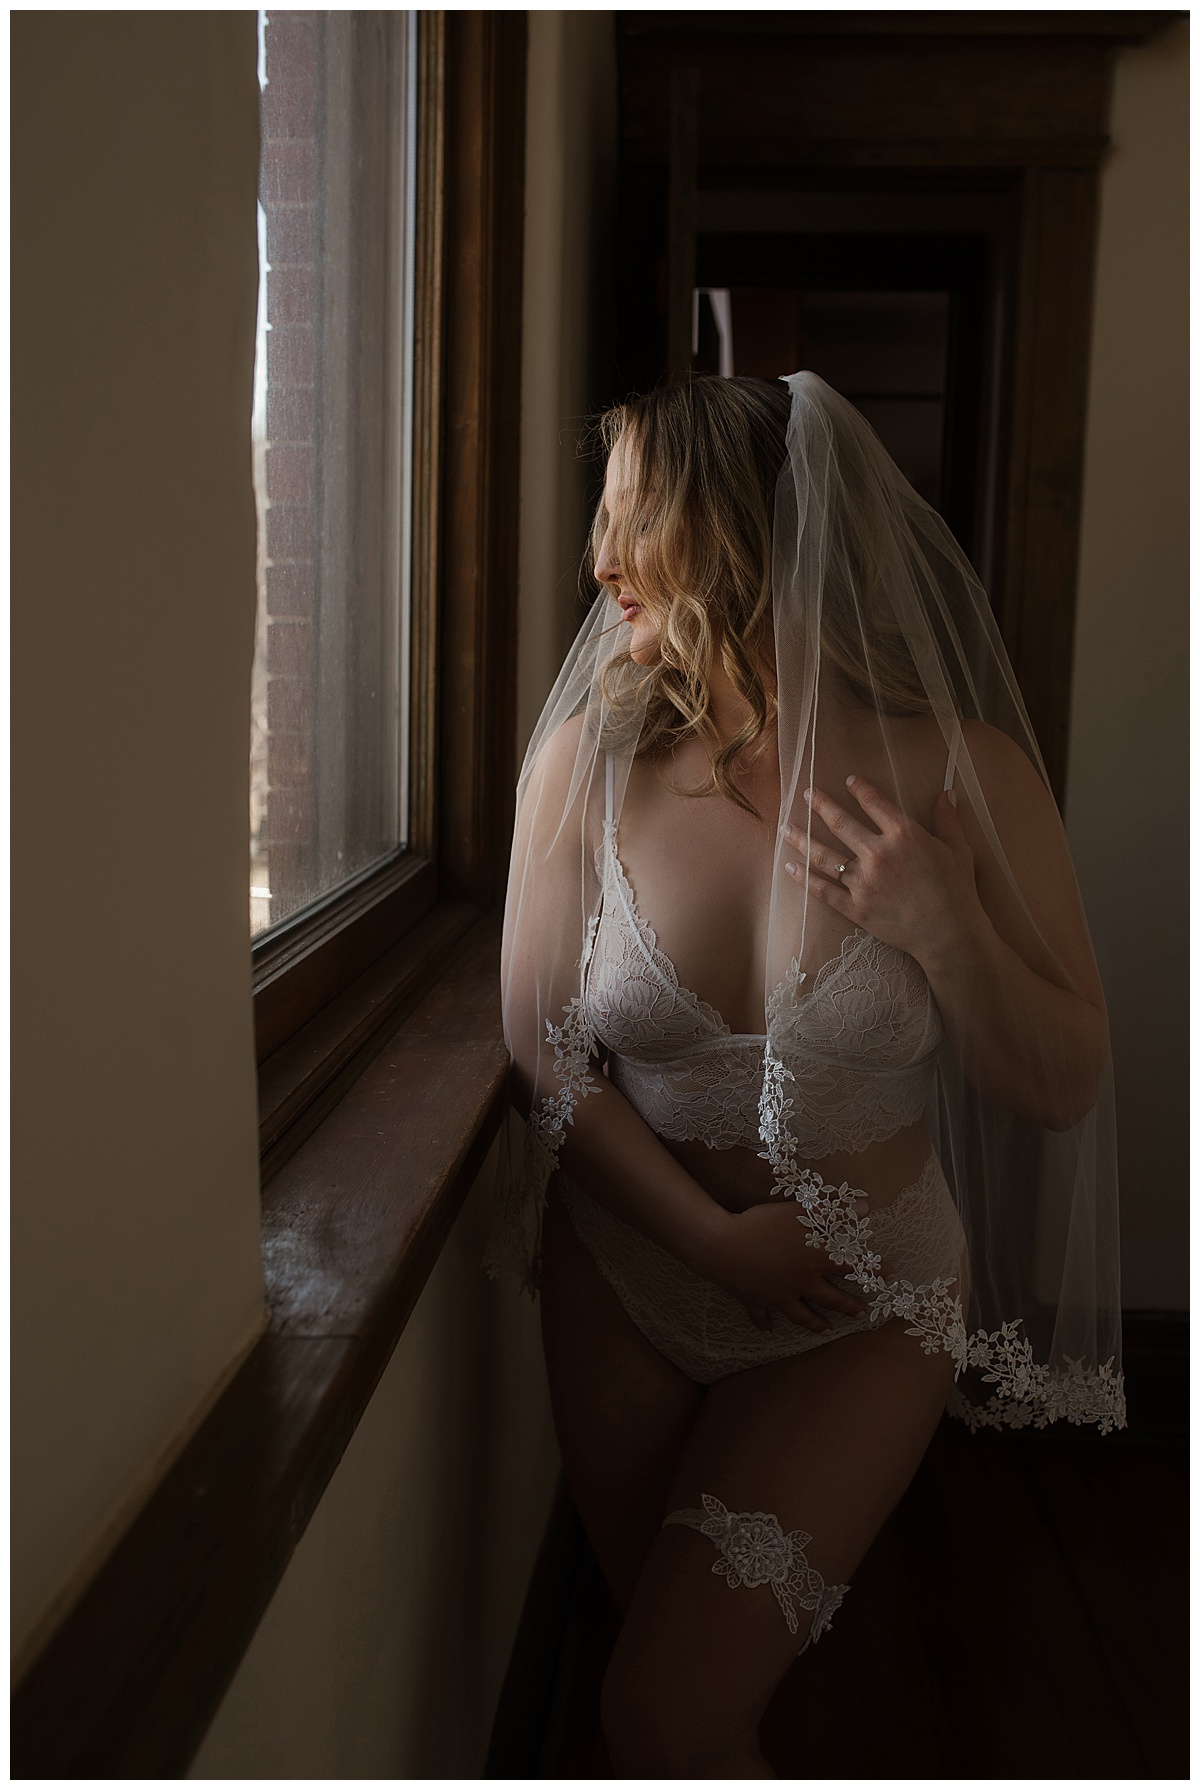 Person stands in front of a window wearing white lingerie for Melissa Brielle Boudoir